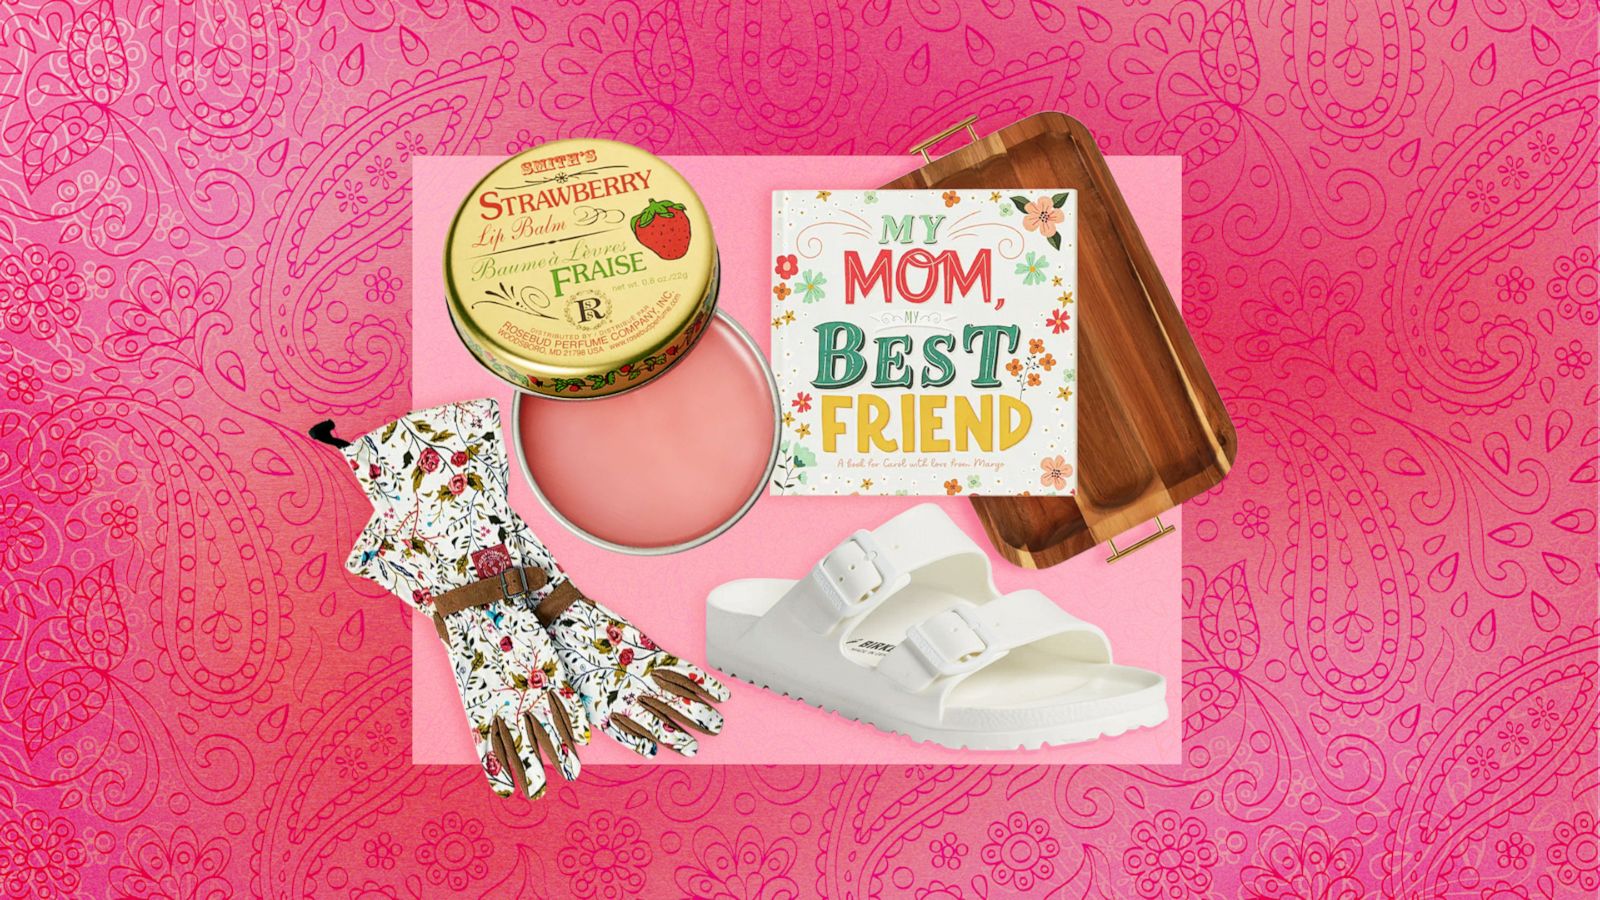 Holiday gifts for moms starting at under $25 - Good Morning America